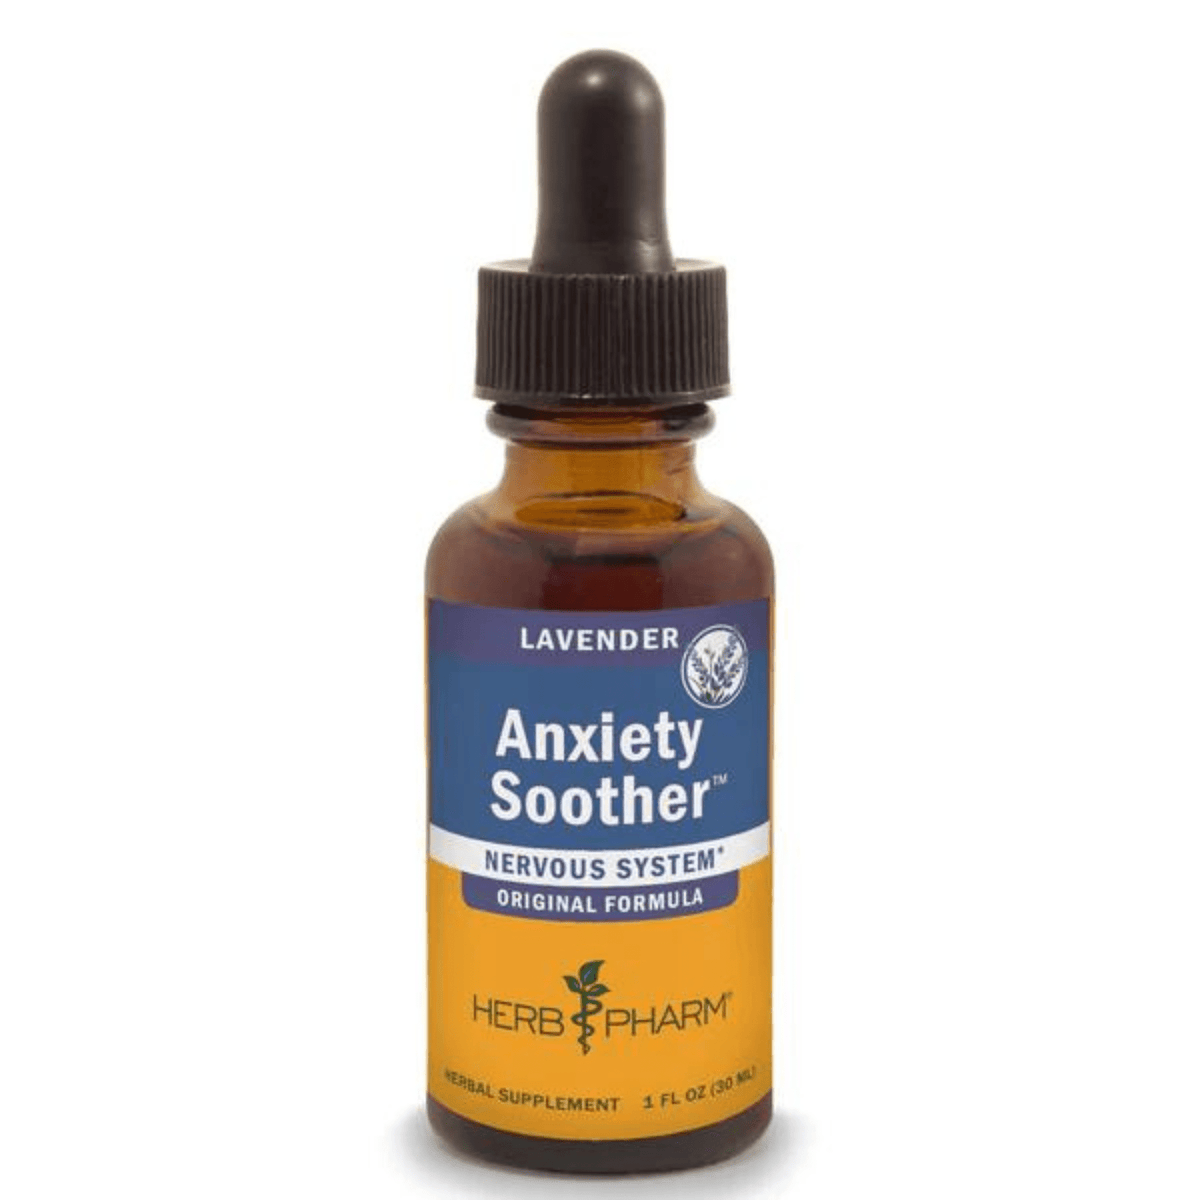 Primary Image of Anxiety Soother Lavender